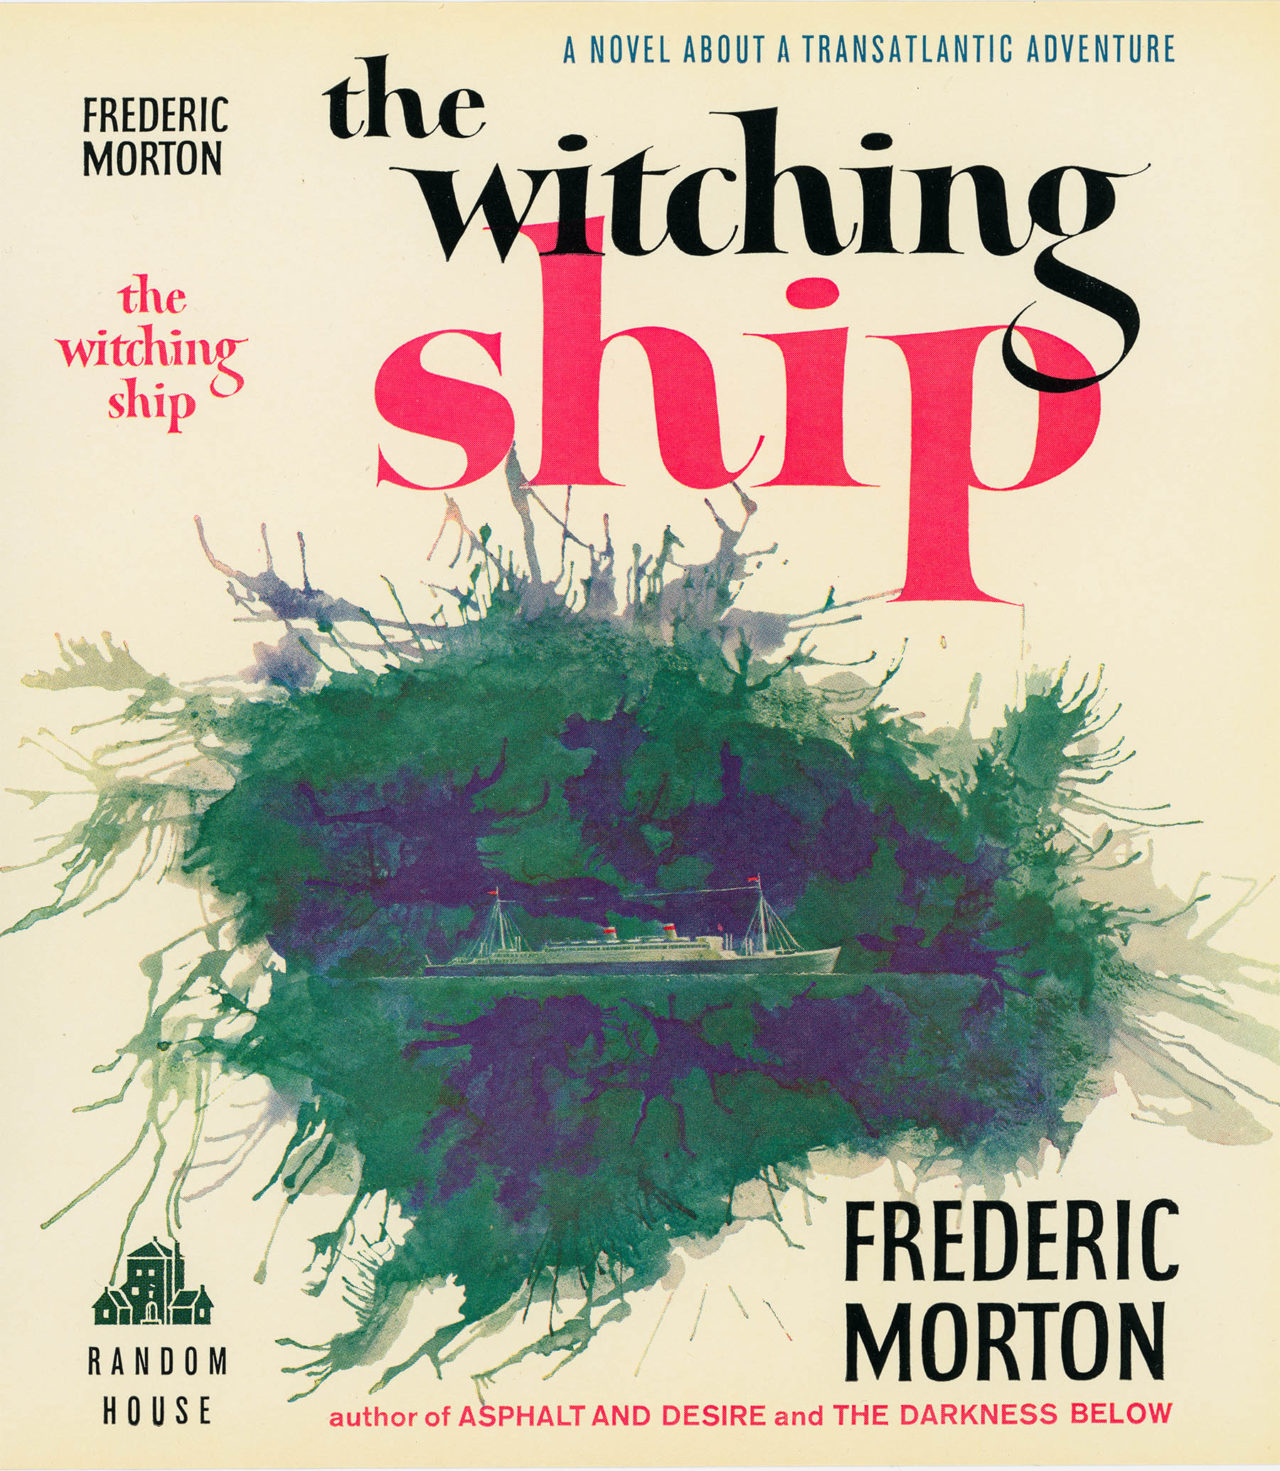 Book jacket of The Witching Ship